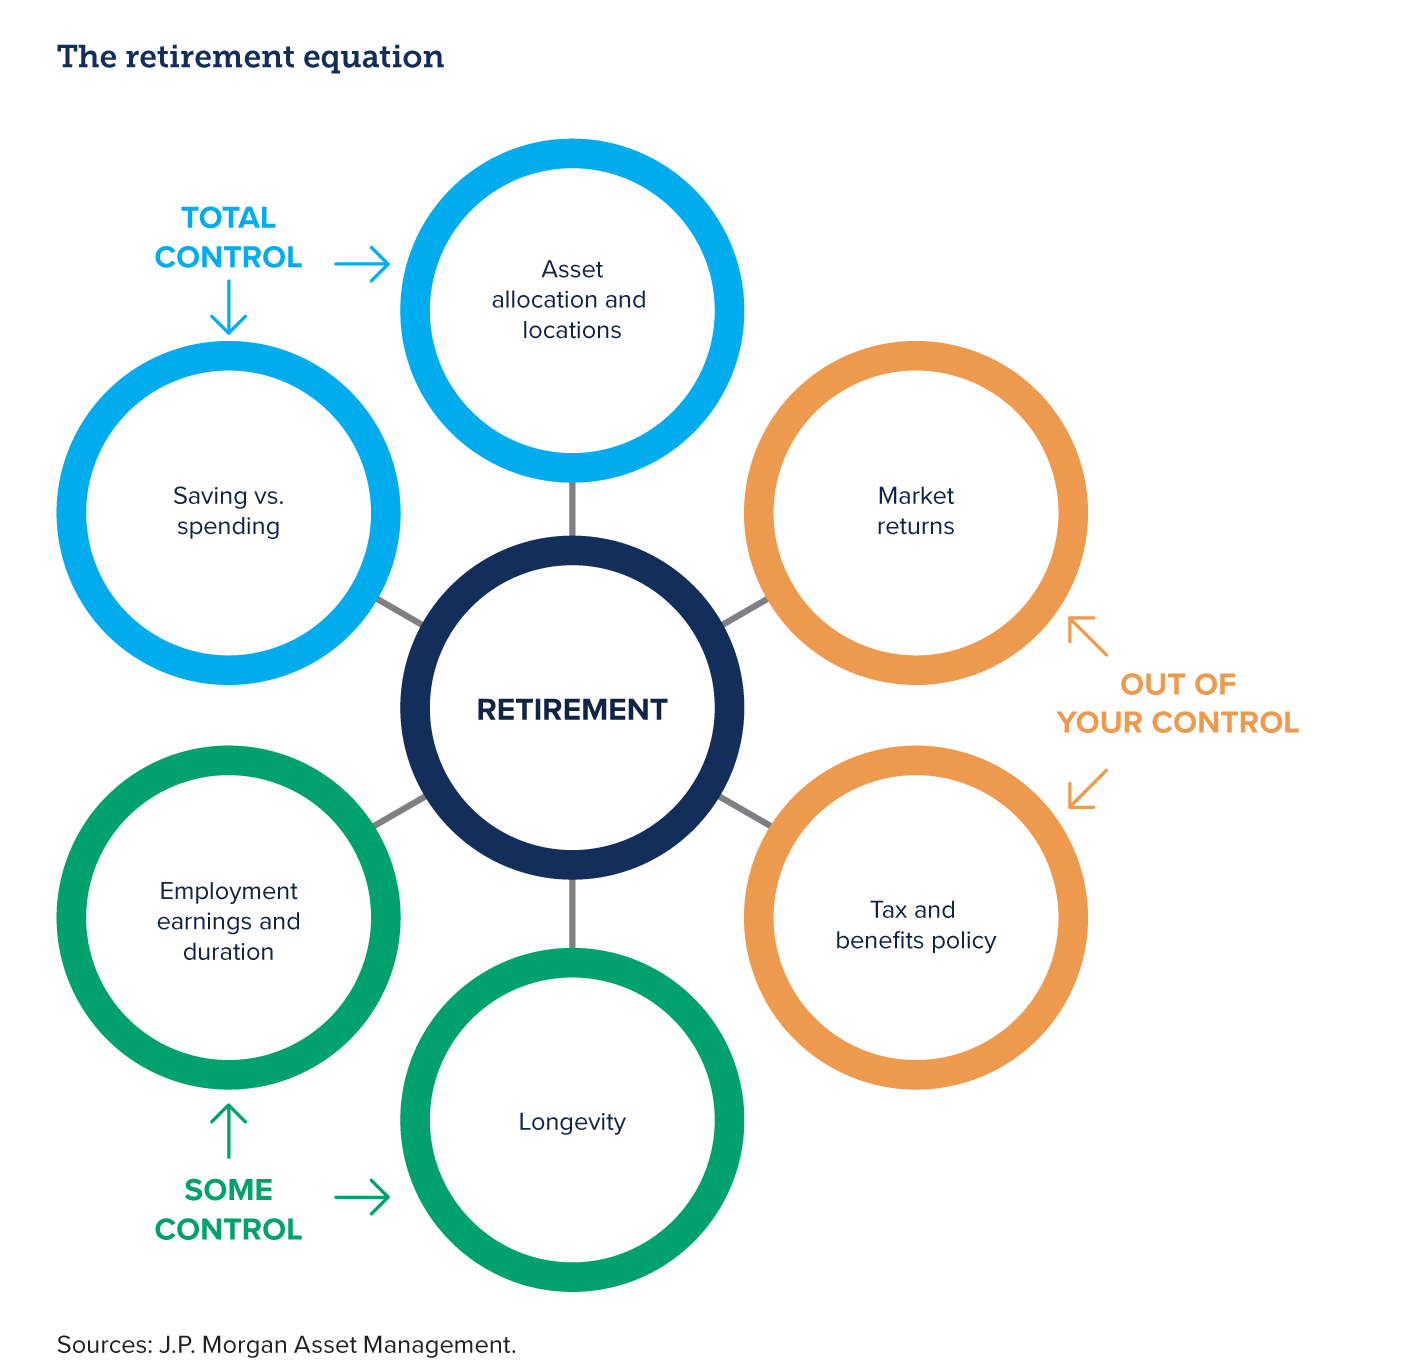 Graphic showing the retirement equation.